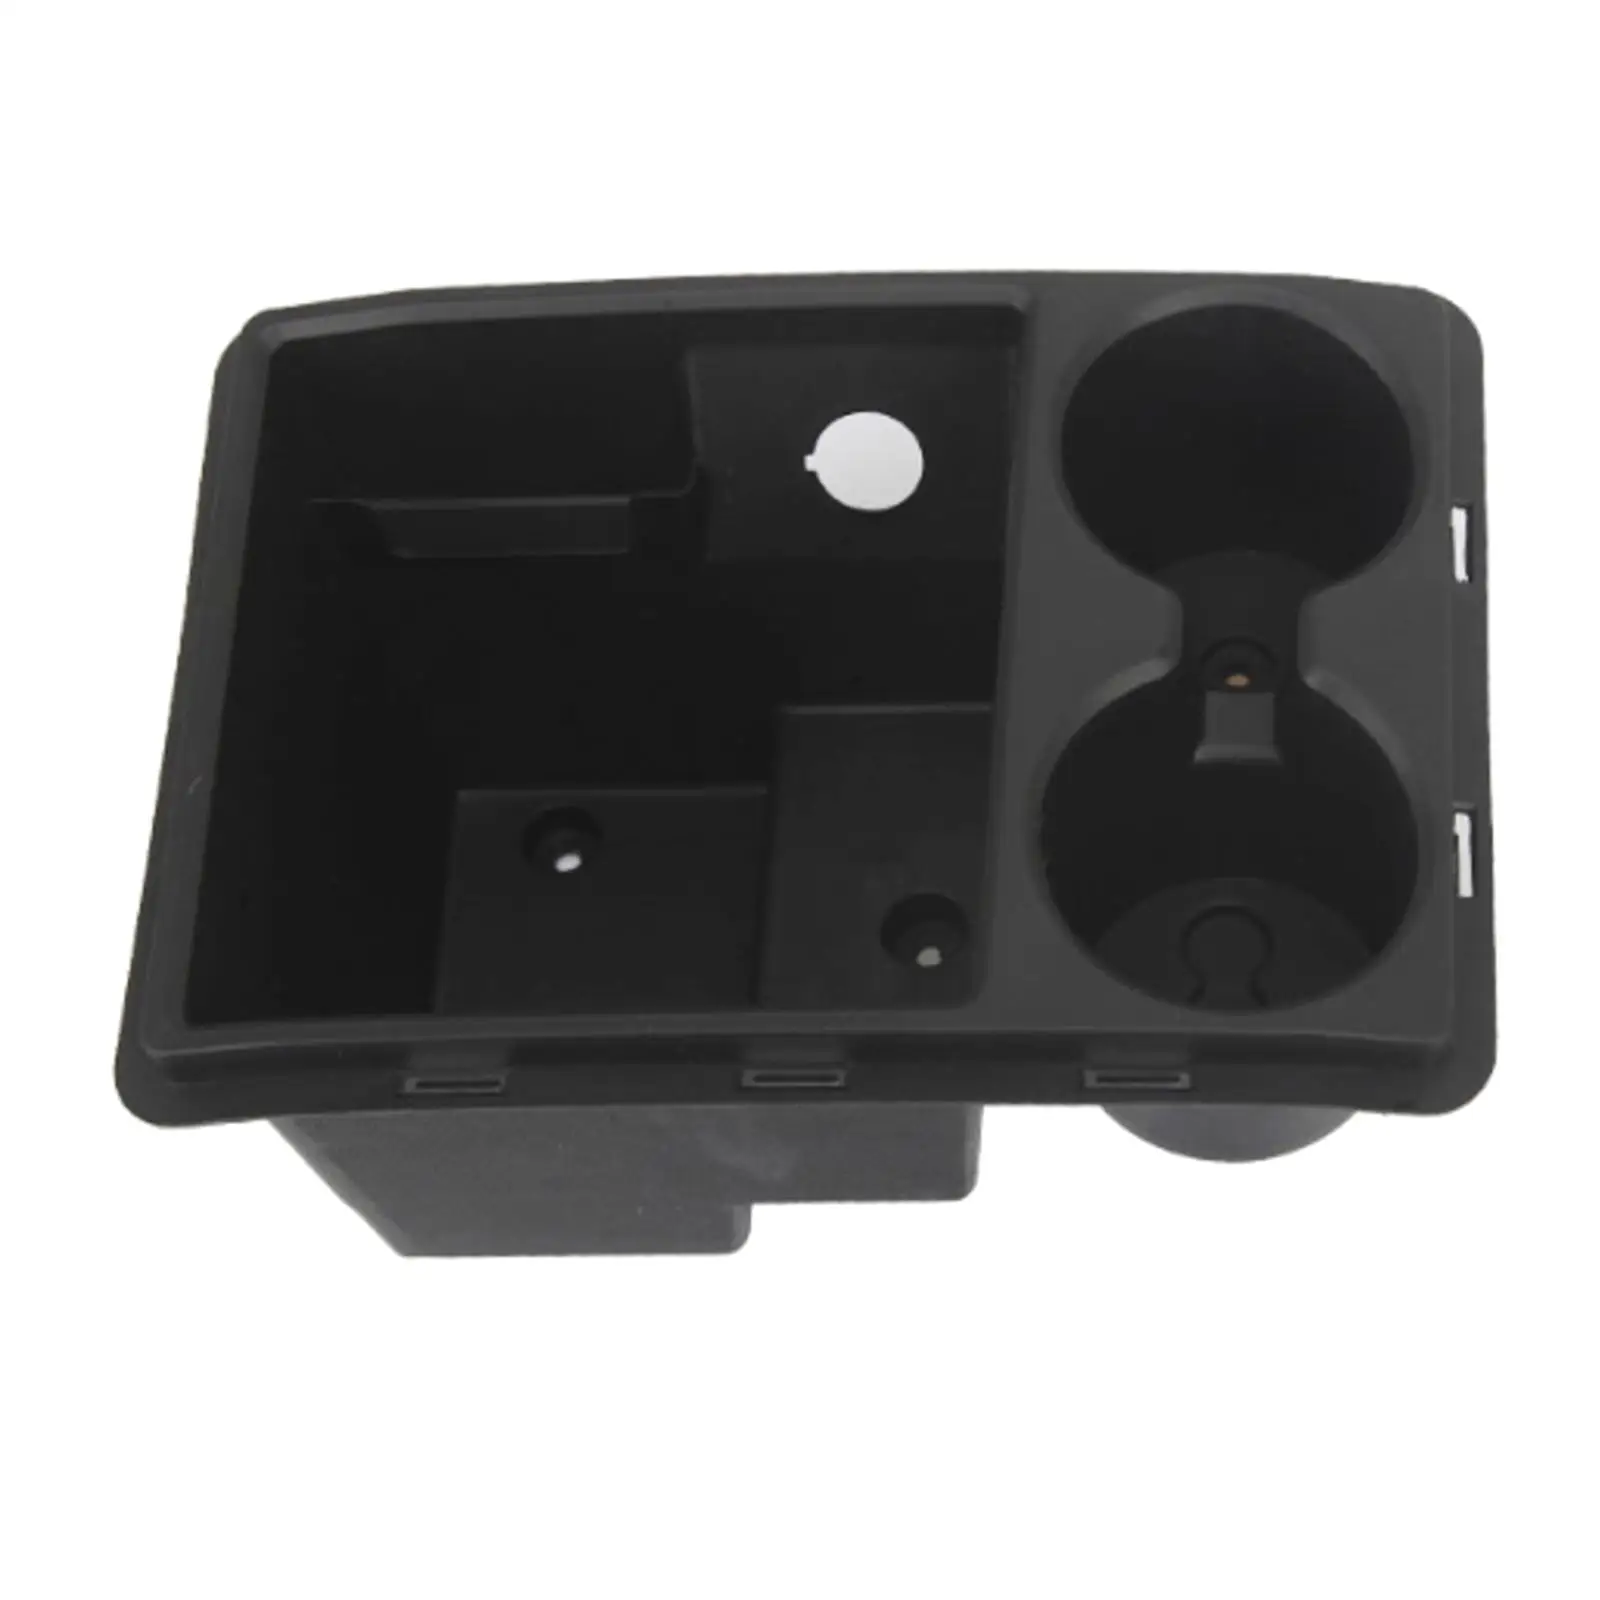 Center Console Organizer Tray Drink Cup Holder Fit for RAM Black Replaces Interior Parts Accessories